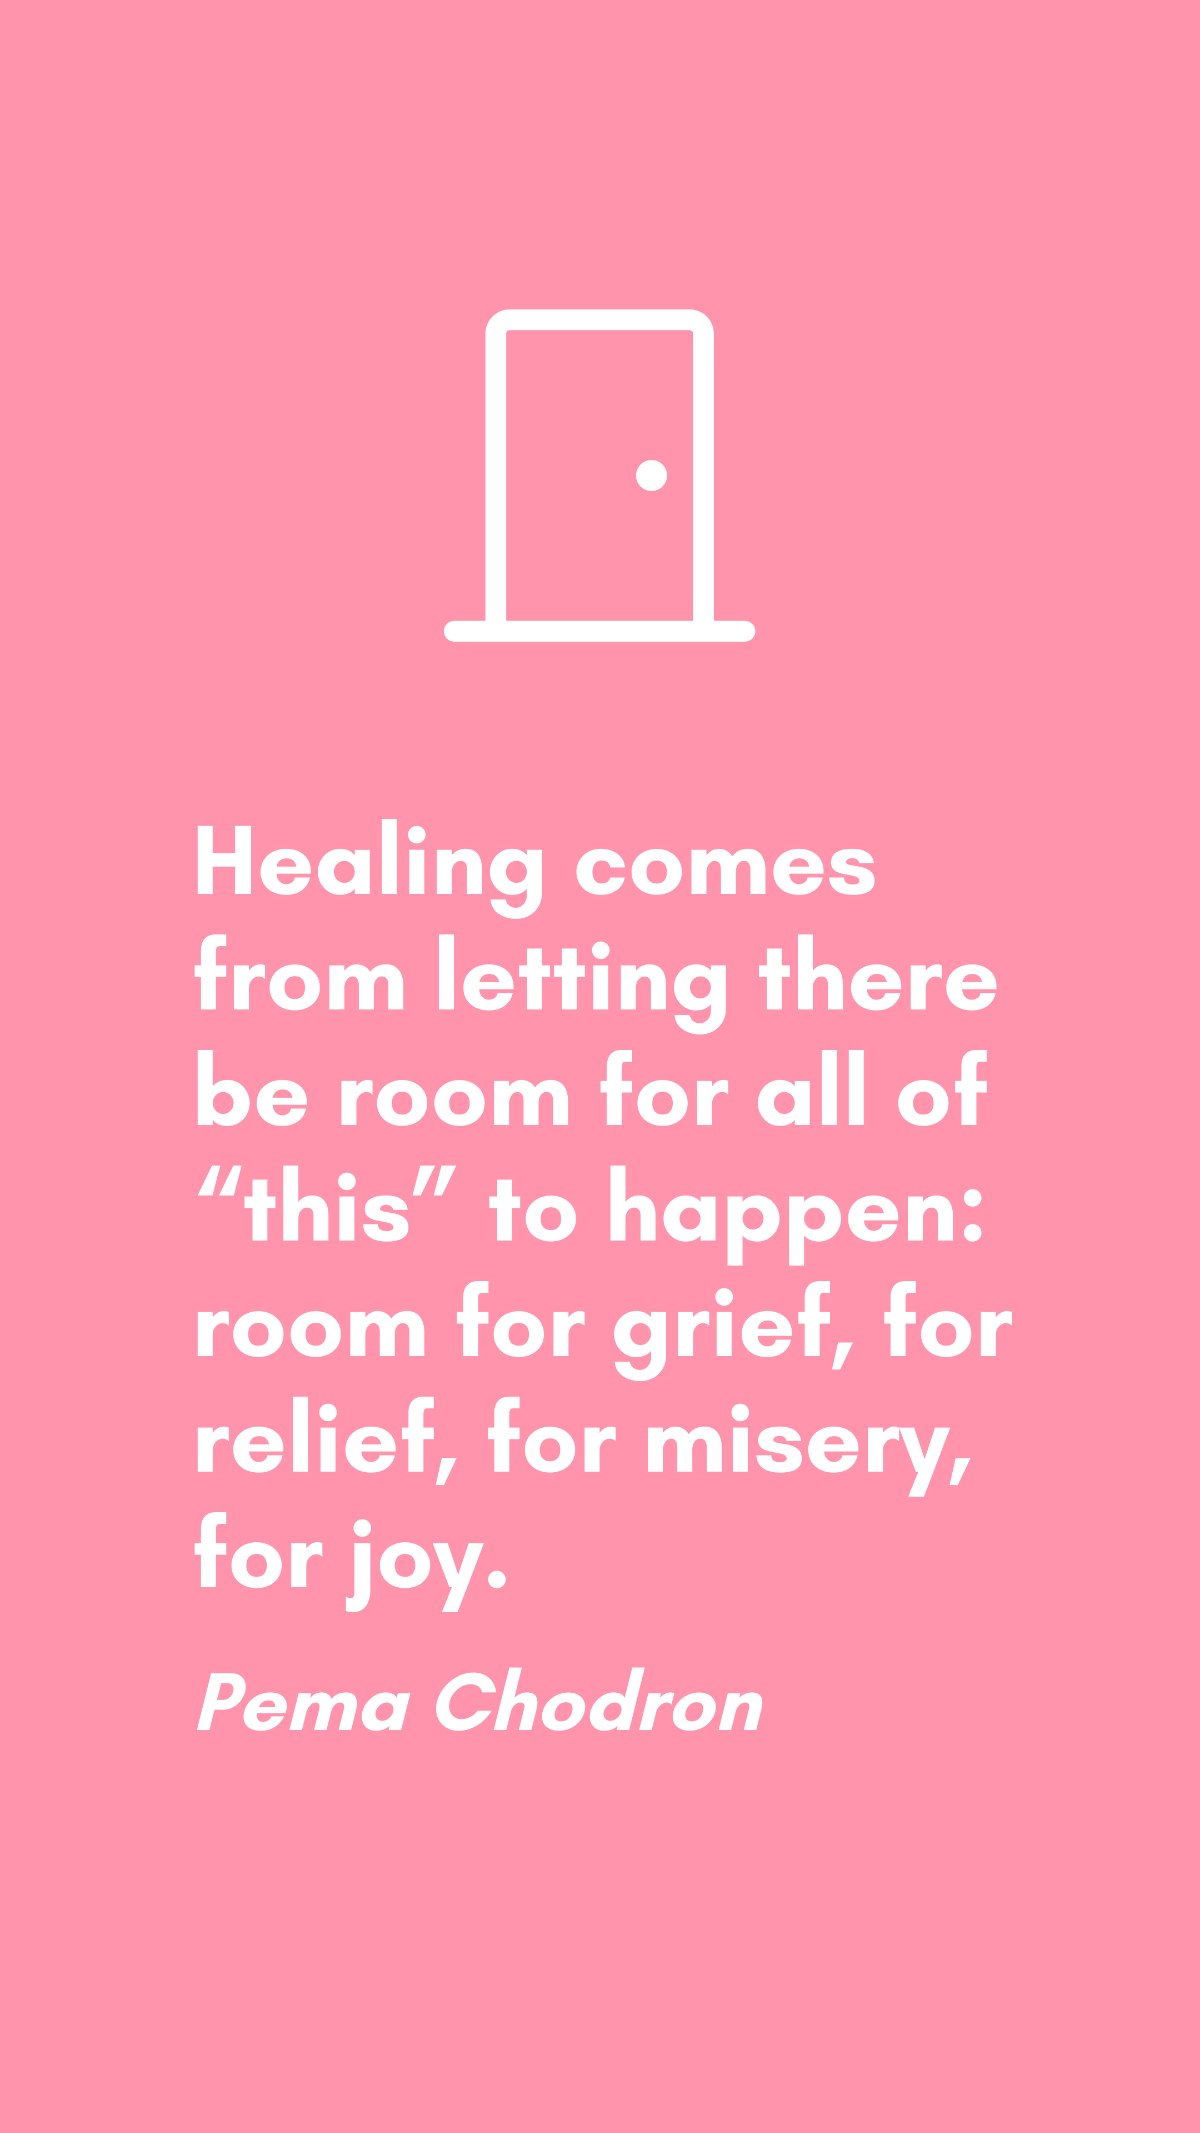 Pema Chodron - Healing comes from letting there be room for all of “this” to happen: room for grief, for relief, for misery, for joy. Template